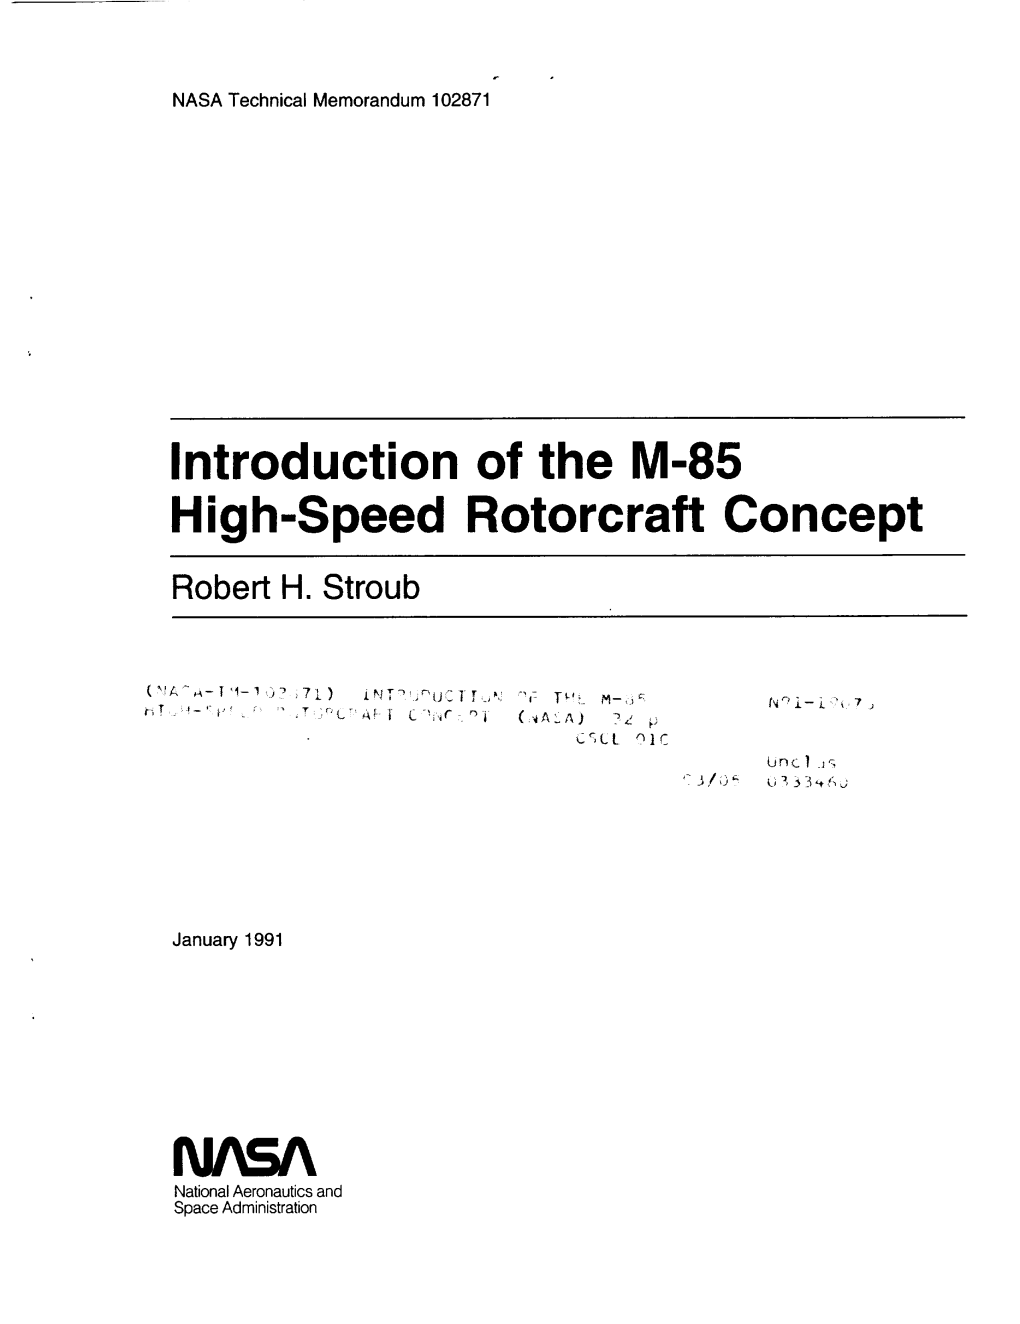 Introduction of the M-85 High-Speed Rotorcraft Concept Robert H